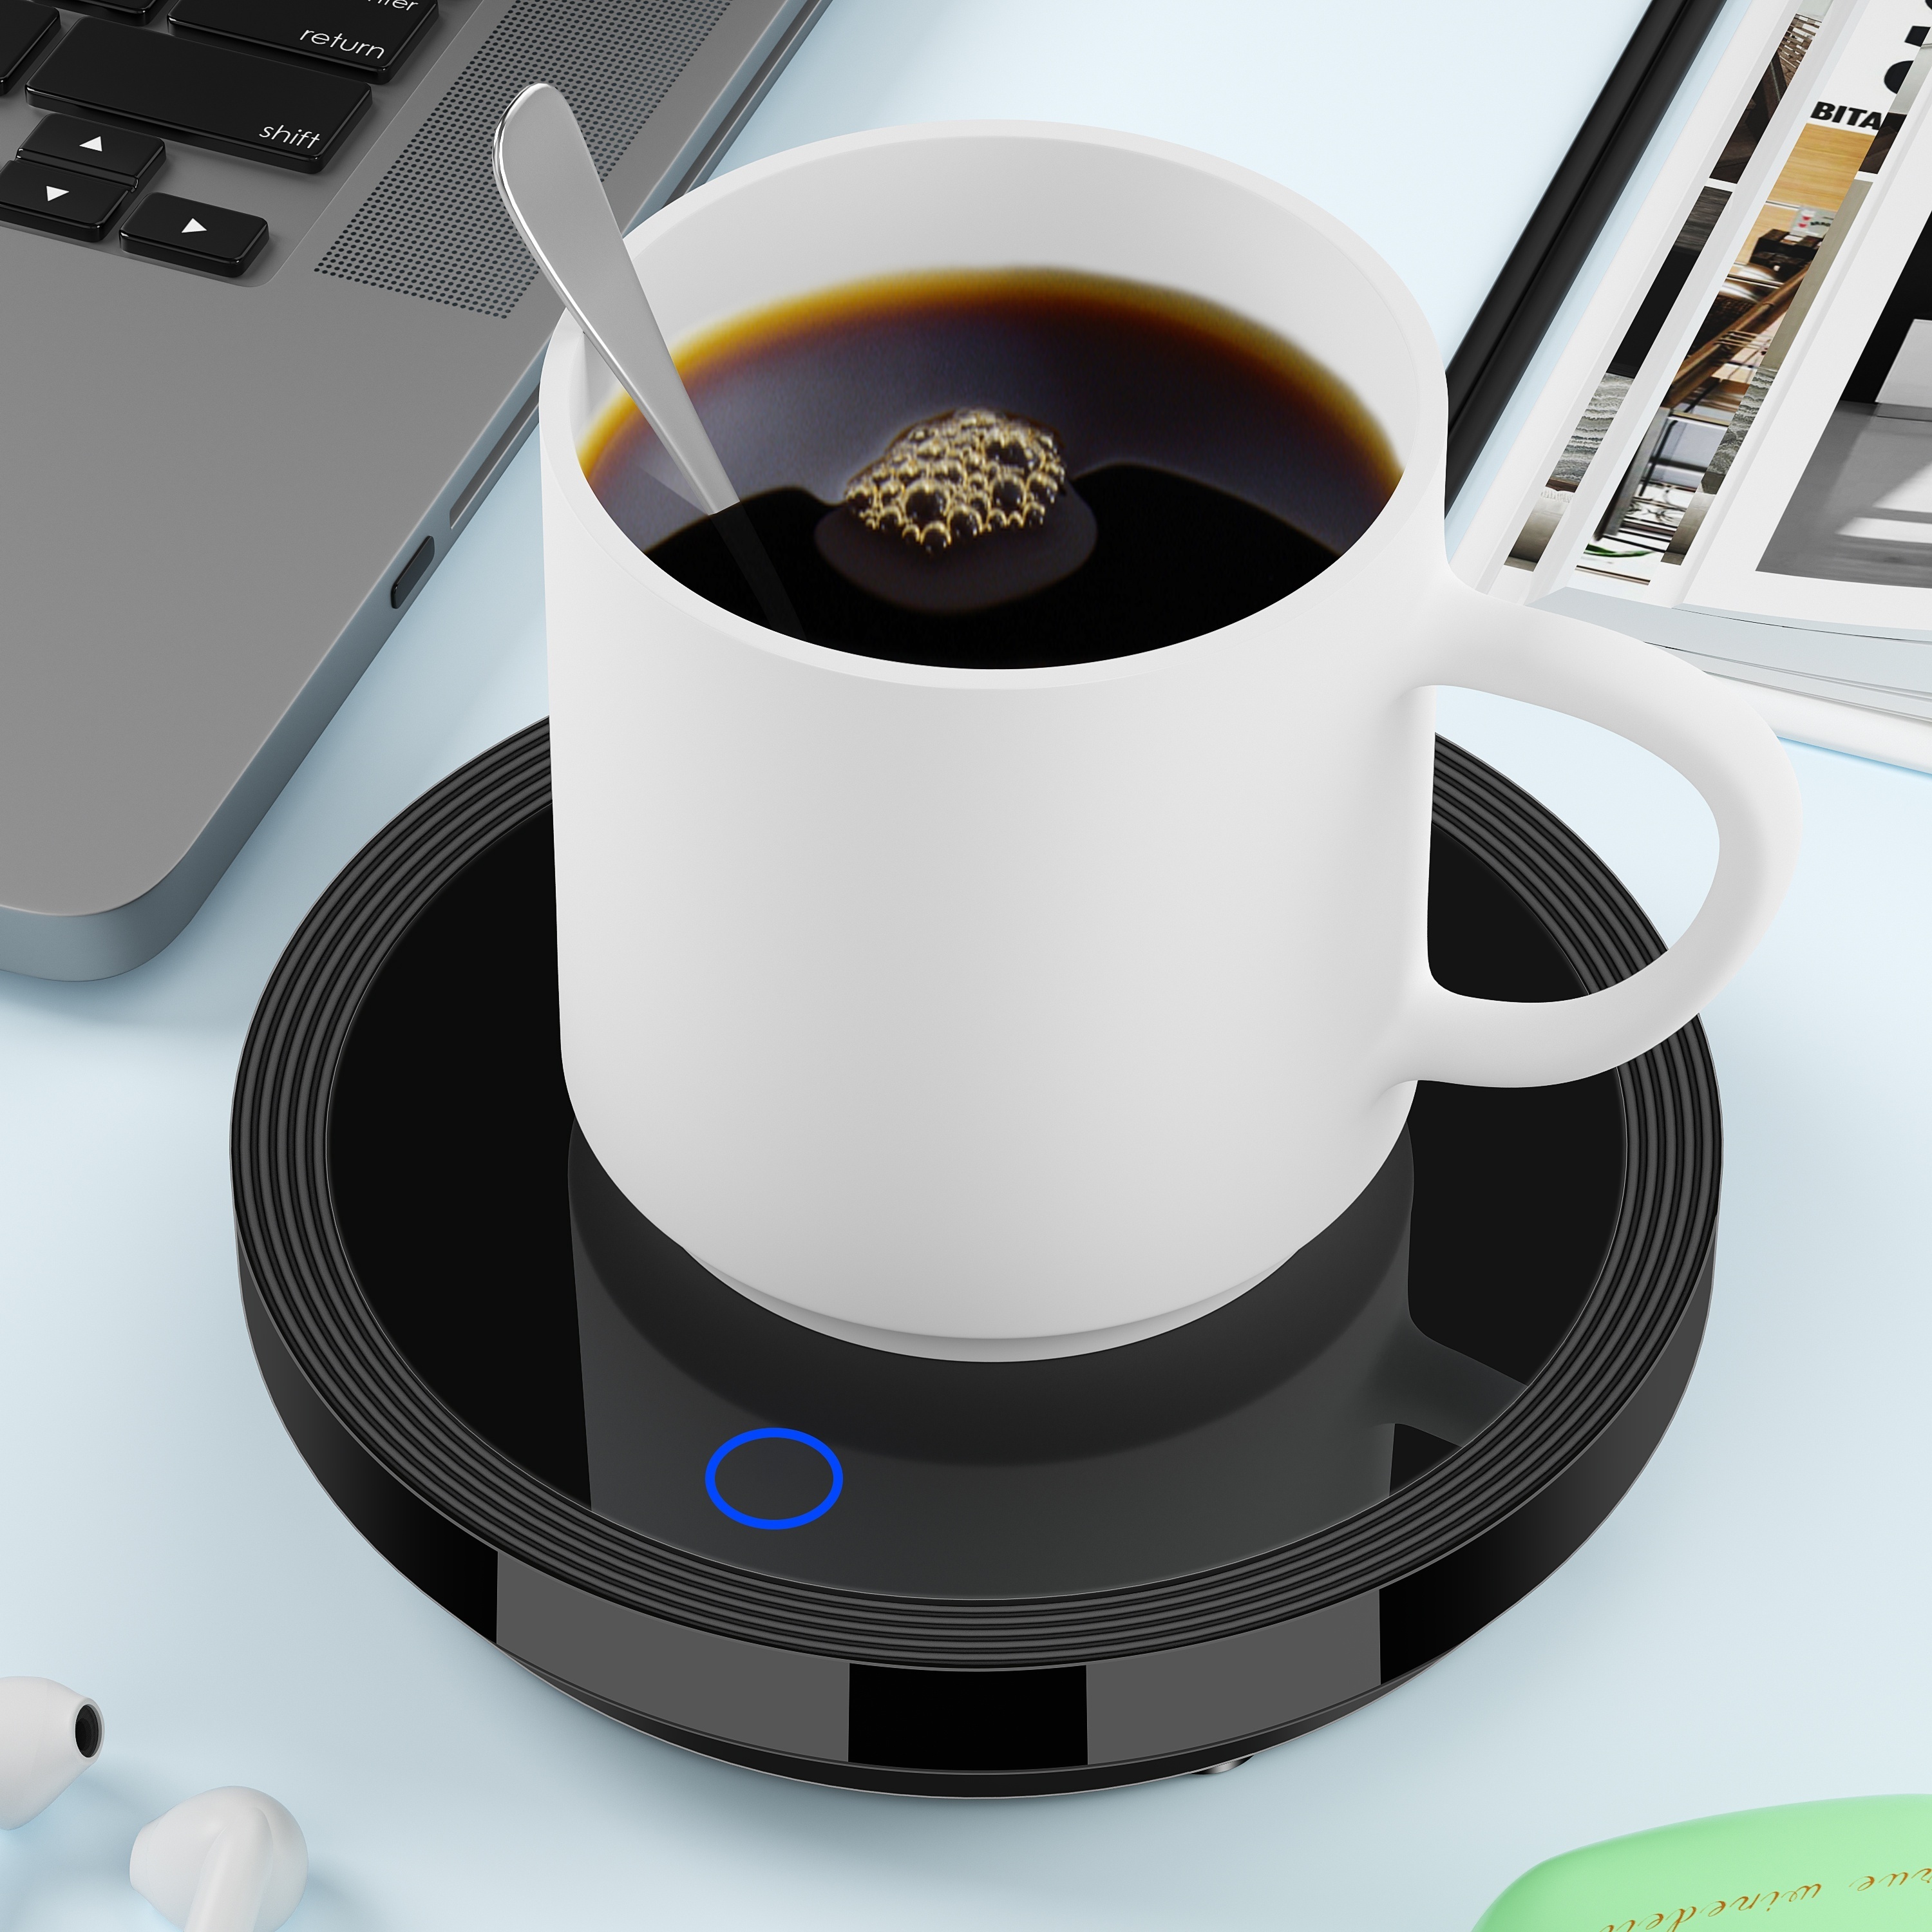 Here's the smart desktop warmer that safely keeps your coffee or